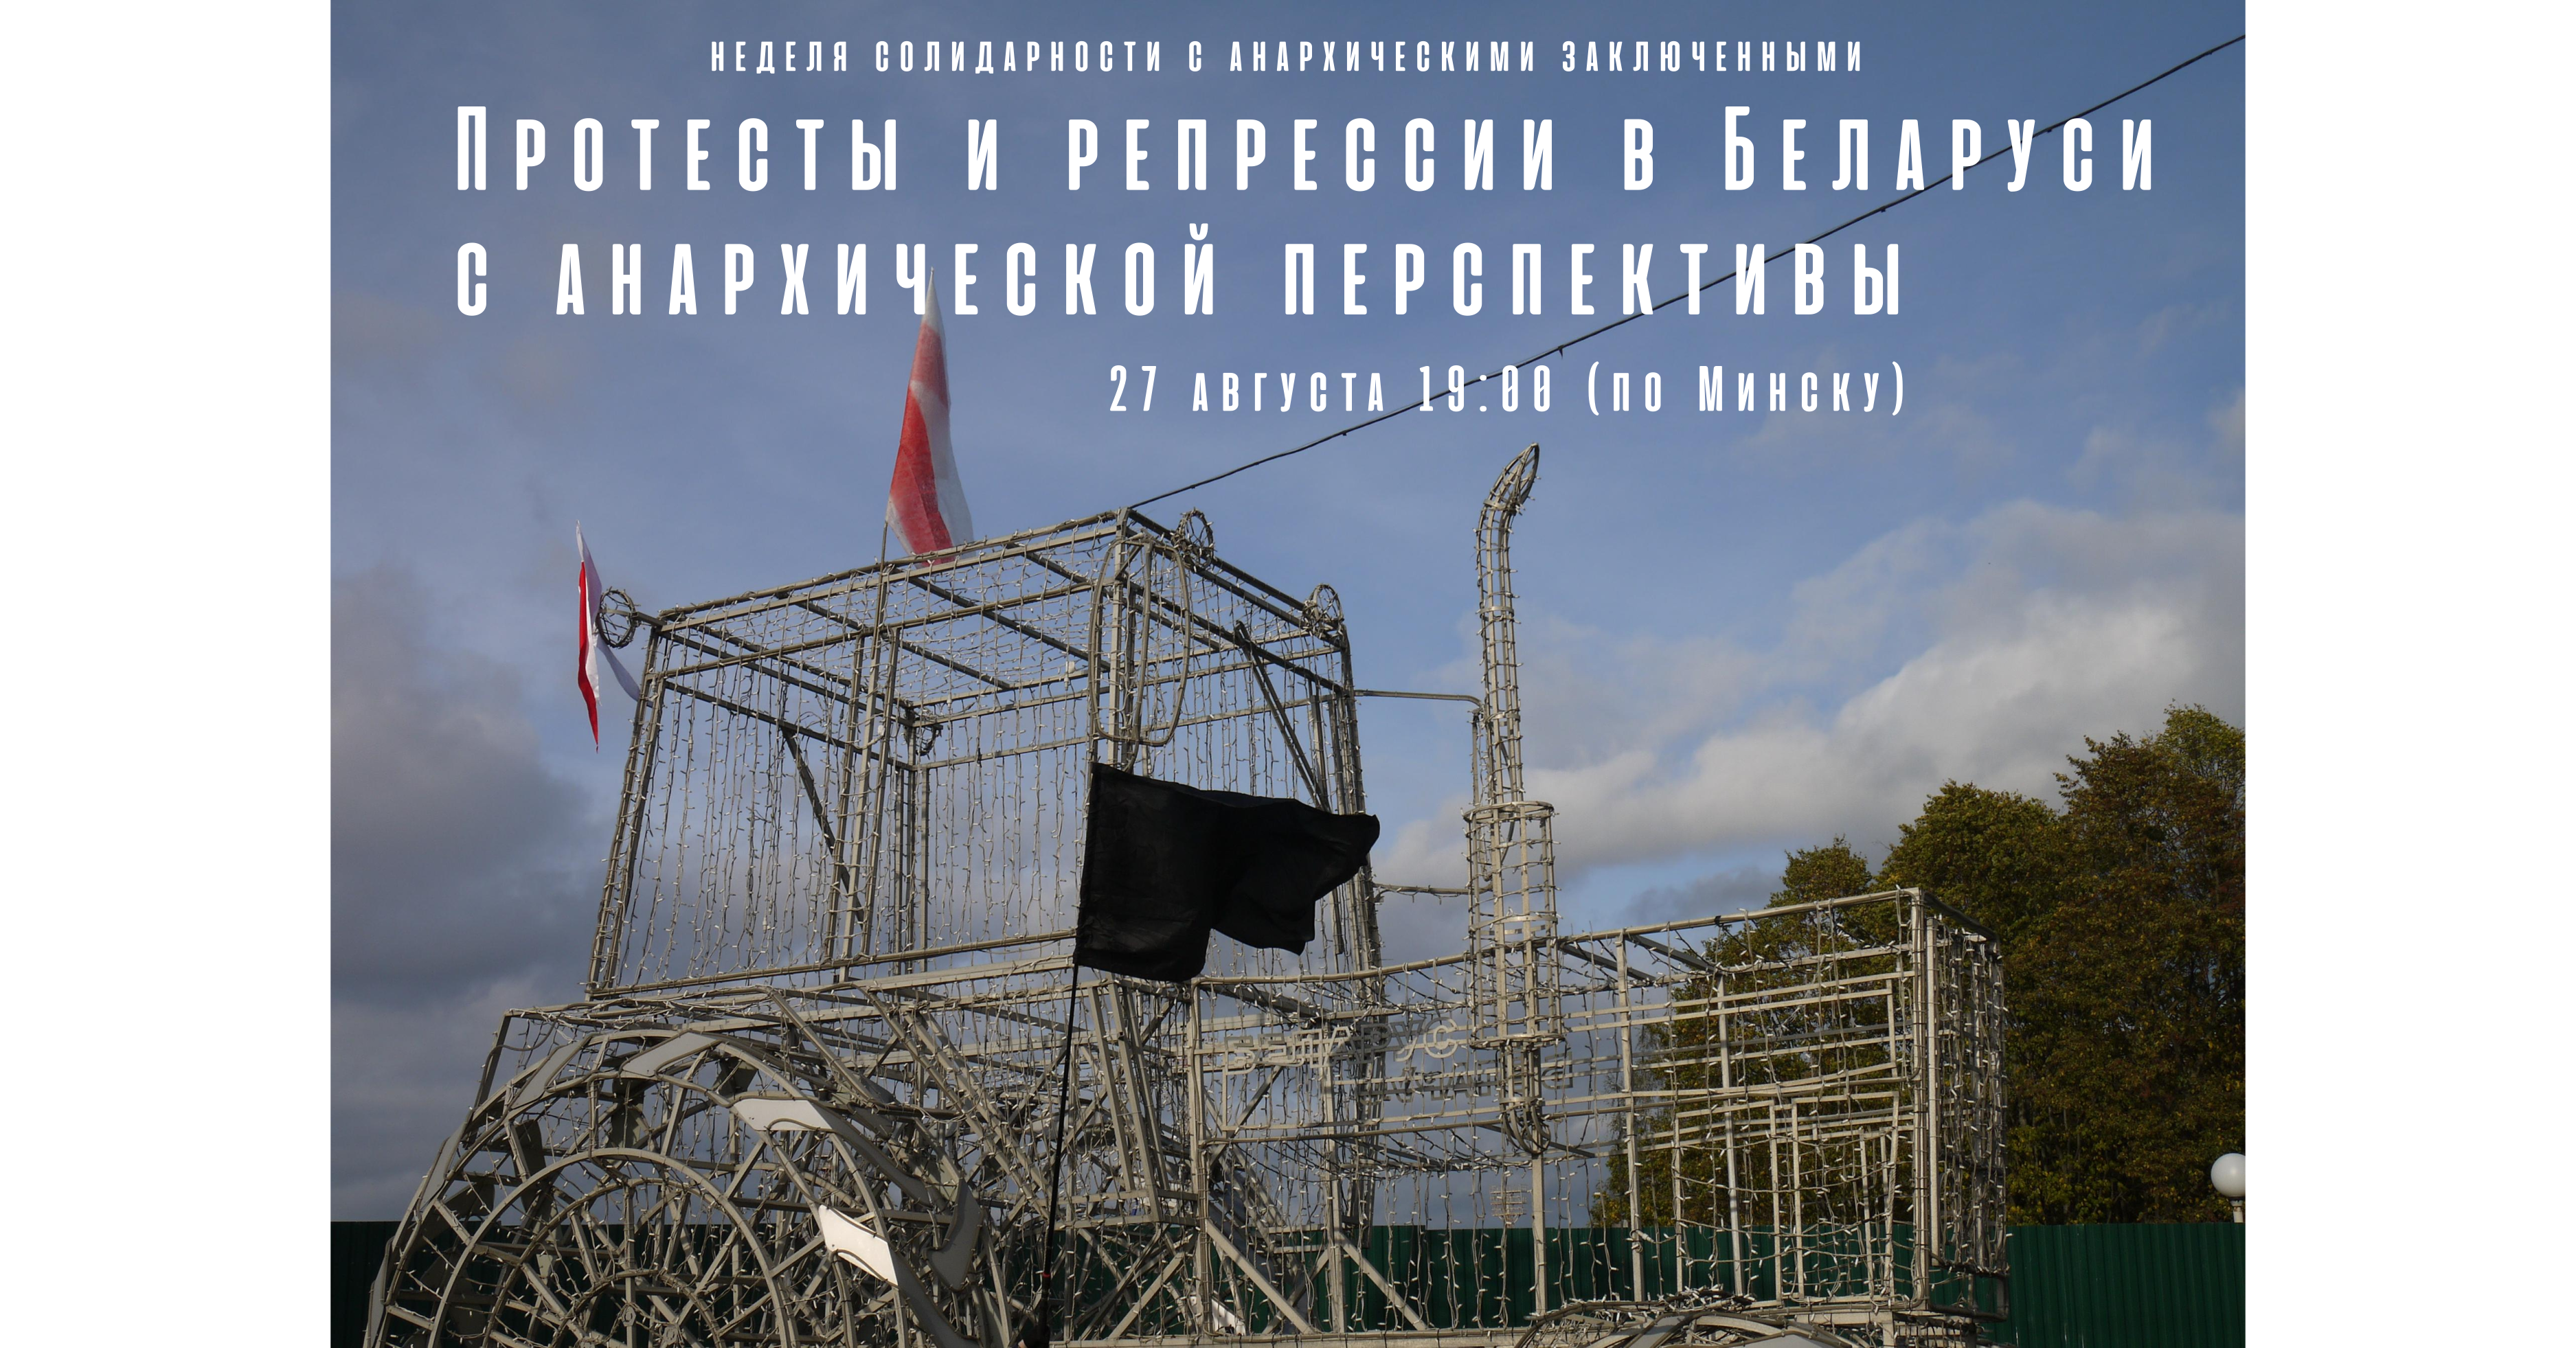 Online presentation “Protests and repressions in Belarus from anarchist perspective” – 27 august 2021 19:00 (Minsk time)